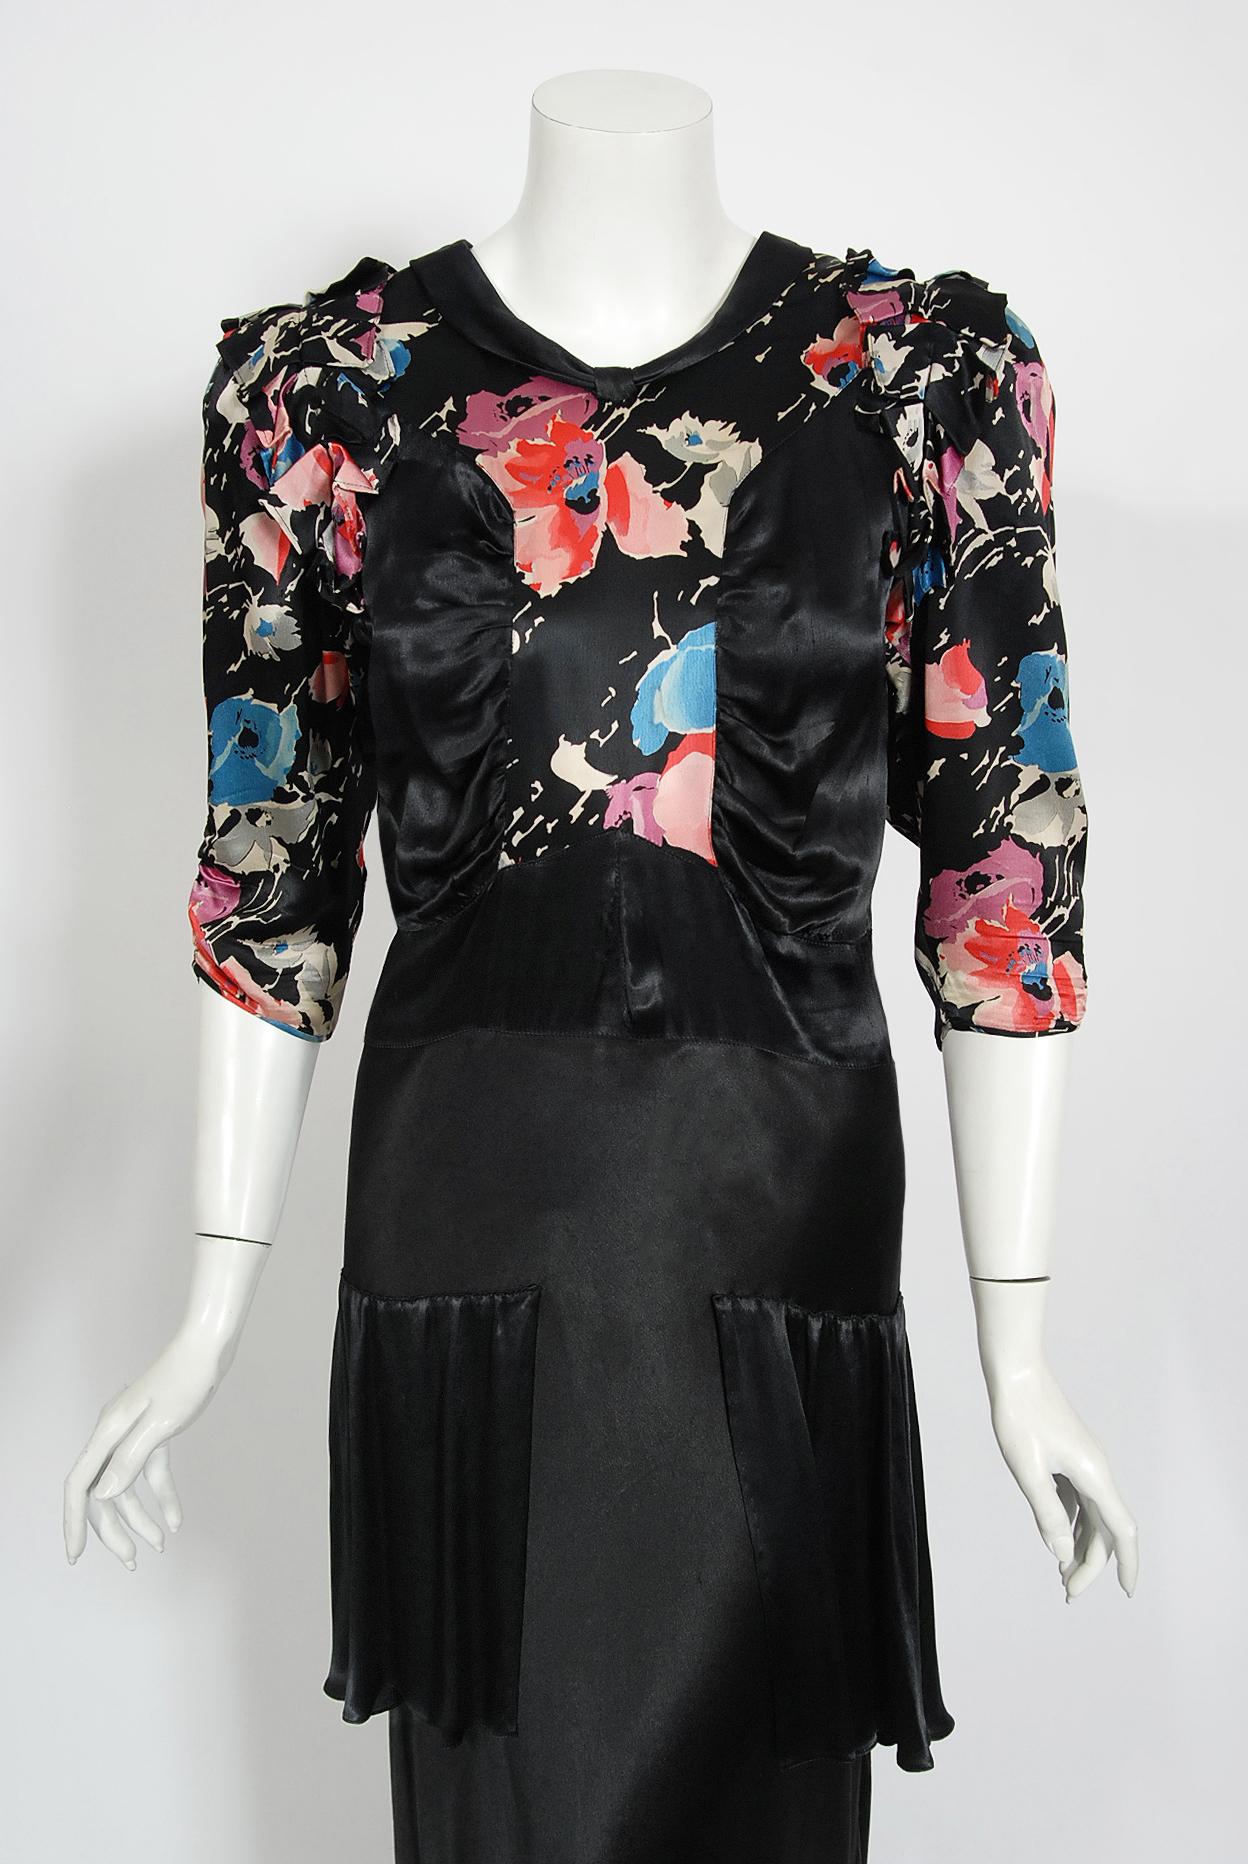 An extraordinarily stunning and exceptional 1930's black floral print liquid silk satin bias-cut gown. Old Hollywood glamour at it's finest! The bodice has the most flattering gathered side-panel design with chic 3/4-length sleeves that have a